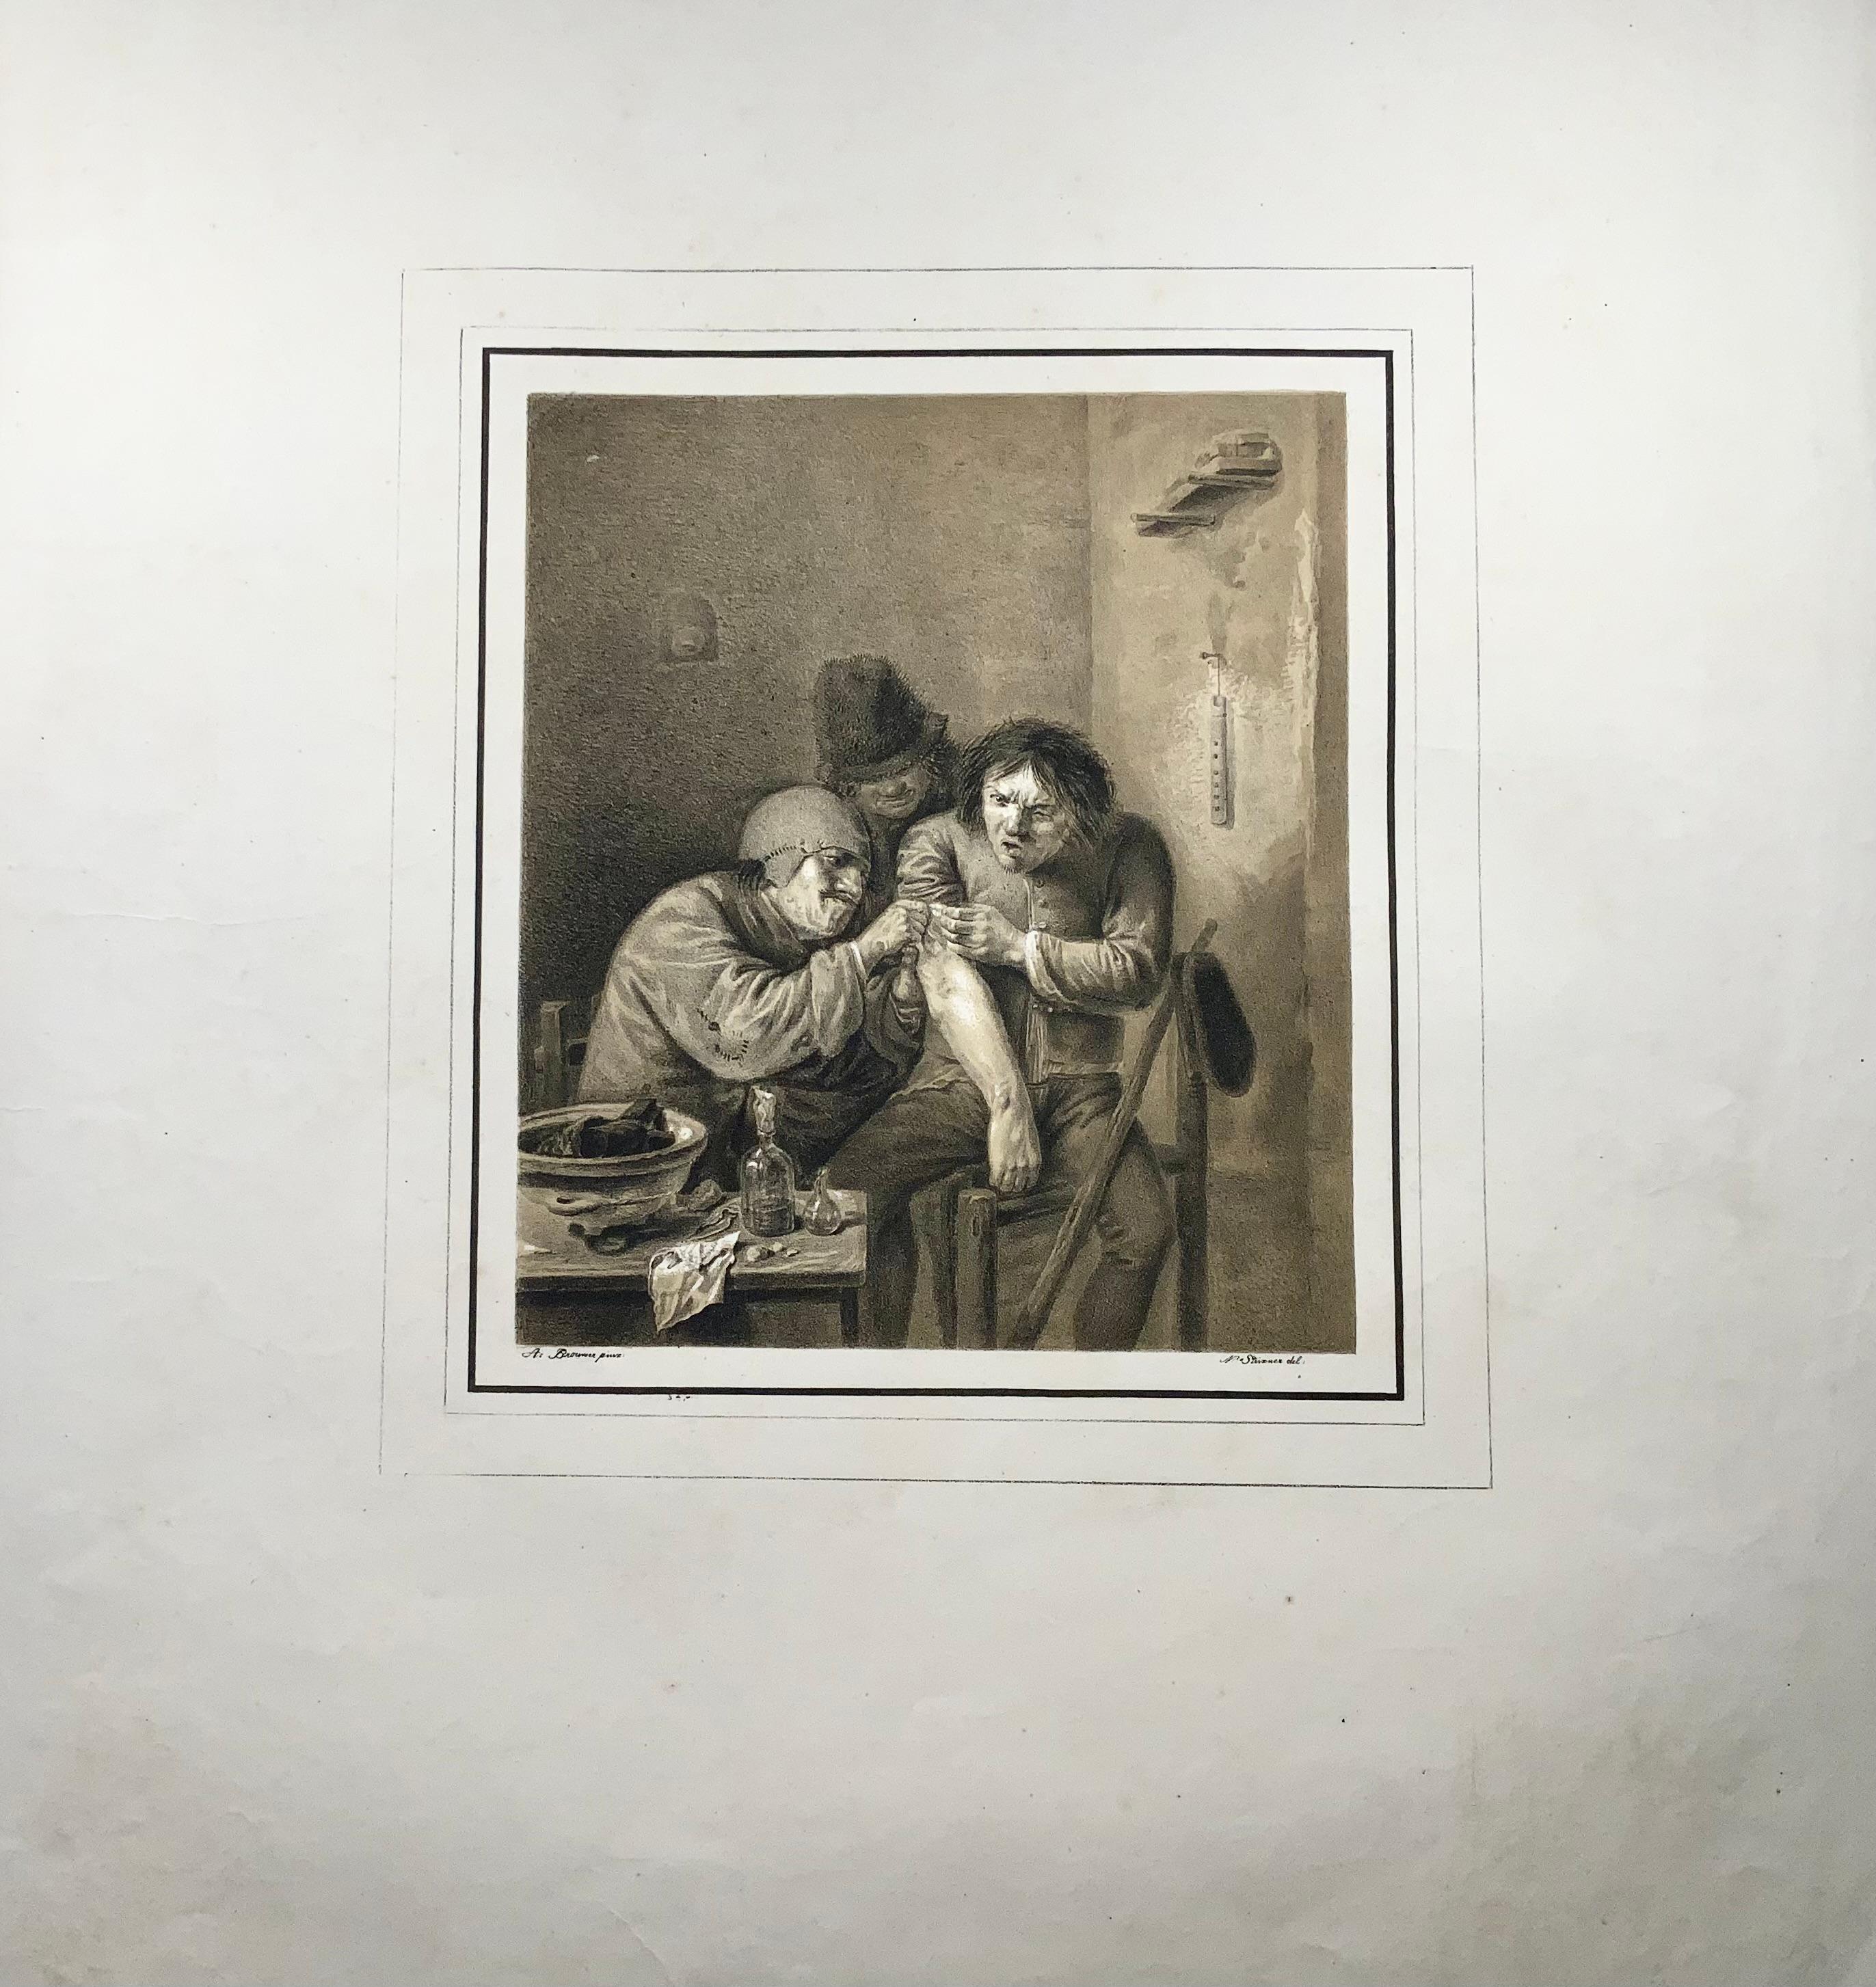 A. Brouwer pinx. N. Strixner del.

Village Surgeon (The Feeling)

A surgeon dressing the wound of a grimacing patient.

61 x 45 cm; Image: 29.3 x 26.3 cm

Published c 1810

Stone lithograph with tinted background.

Reference: Wellcome Collection